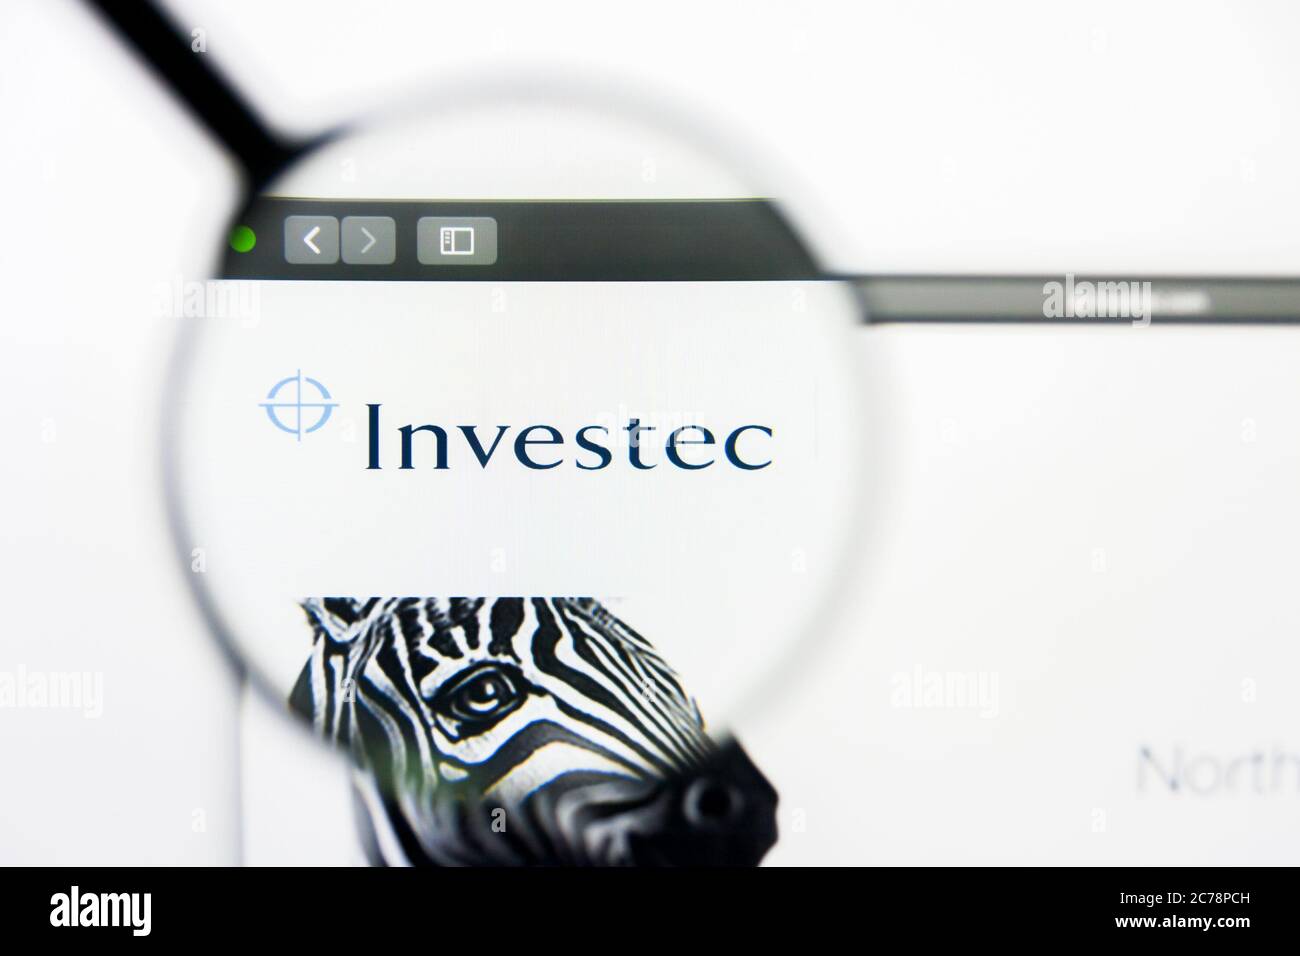 Los Angeles, California, USA - 23 March 2019: Illustrative Editorial of Investec website homepage. Investec logo visible on display screen. Stock Photo